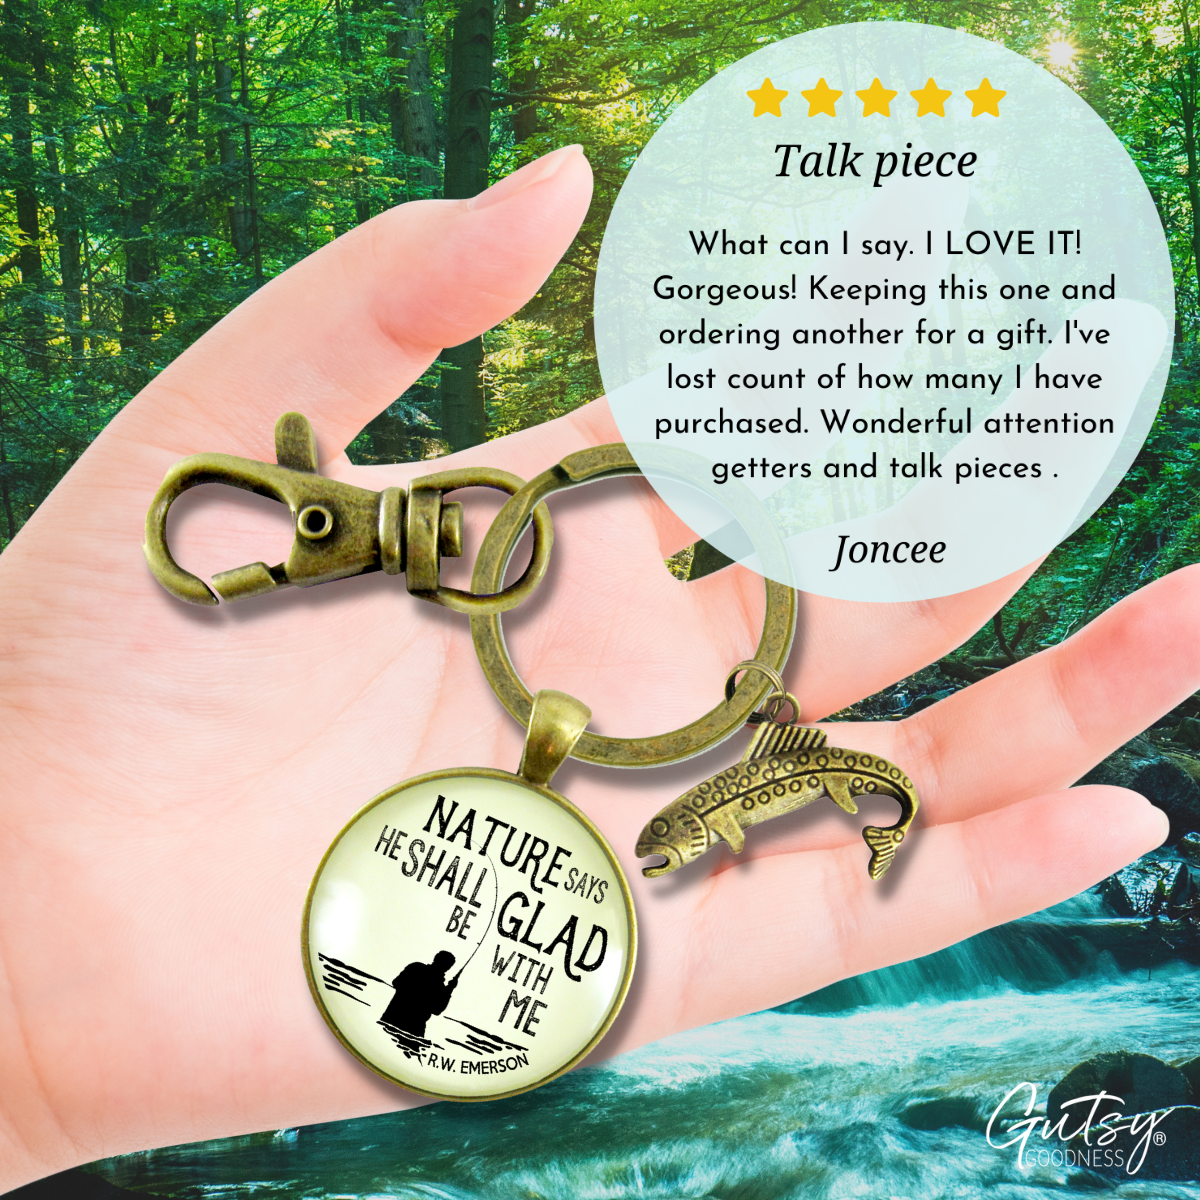 Fishing Keychain Dad Nature Says Outdoorsman Rustic Key Ring Gift For Father Sportsman - Gutsy Goodness Handmade Jewelry;Fishing Keychain Dad Nature Says Outdoorsman Rustic Key Ring Gift For Father Sportsman - Gutsy Goodness Handmade Jewelry Gifts